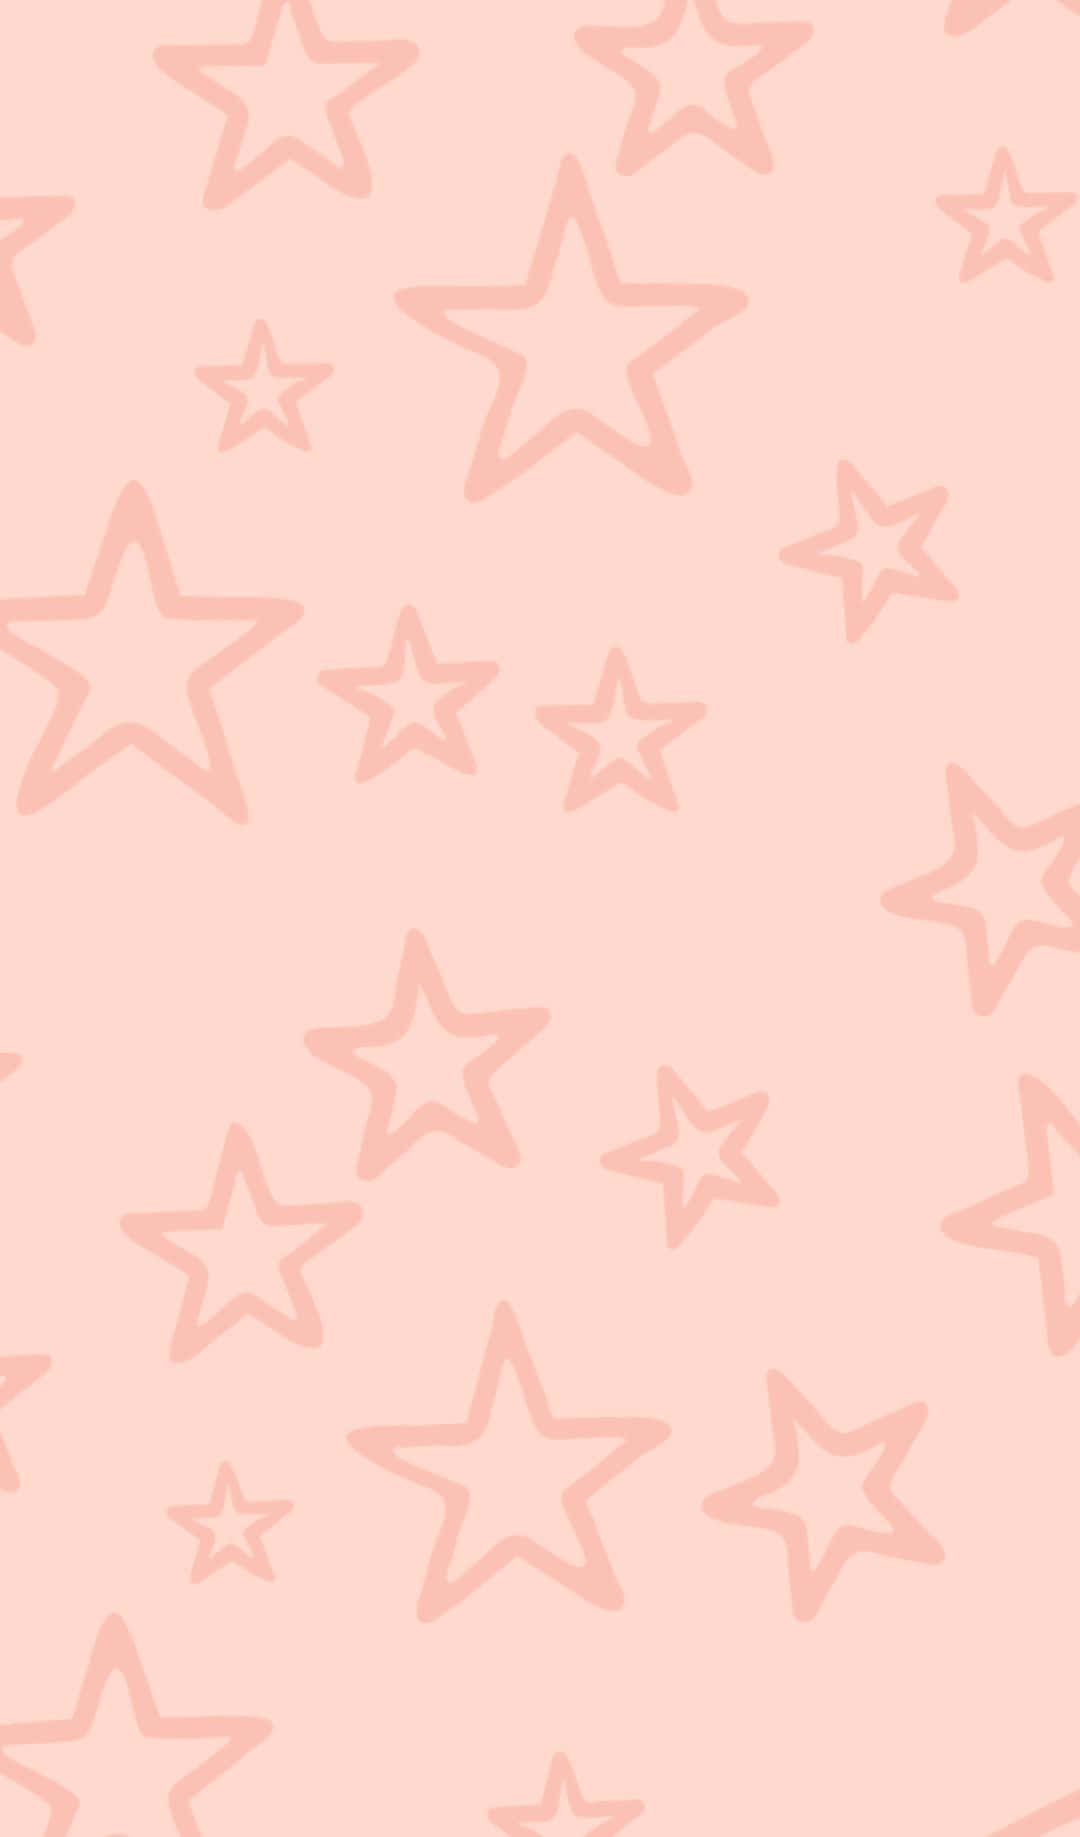 Shining Star In Aesthetically Pleasing Background Background